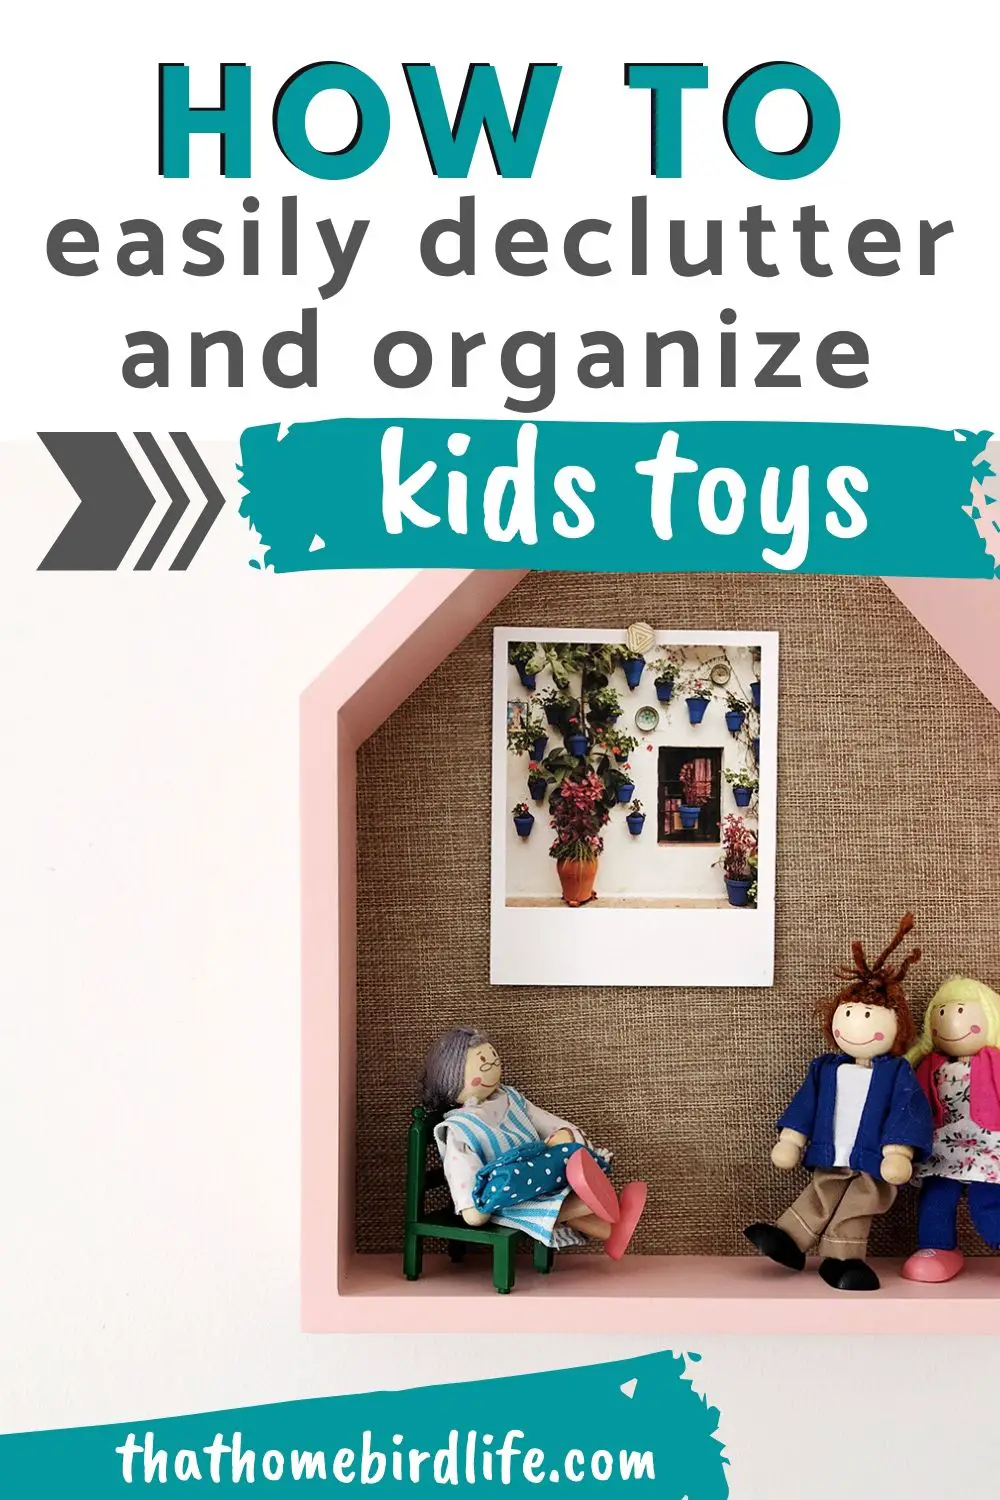 How to Declutter and Organize Kids Toys